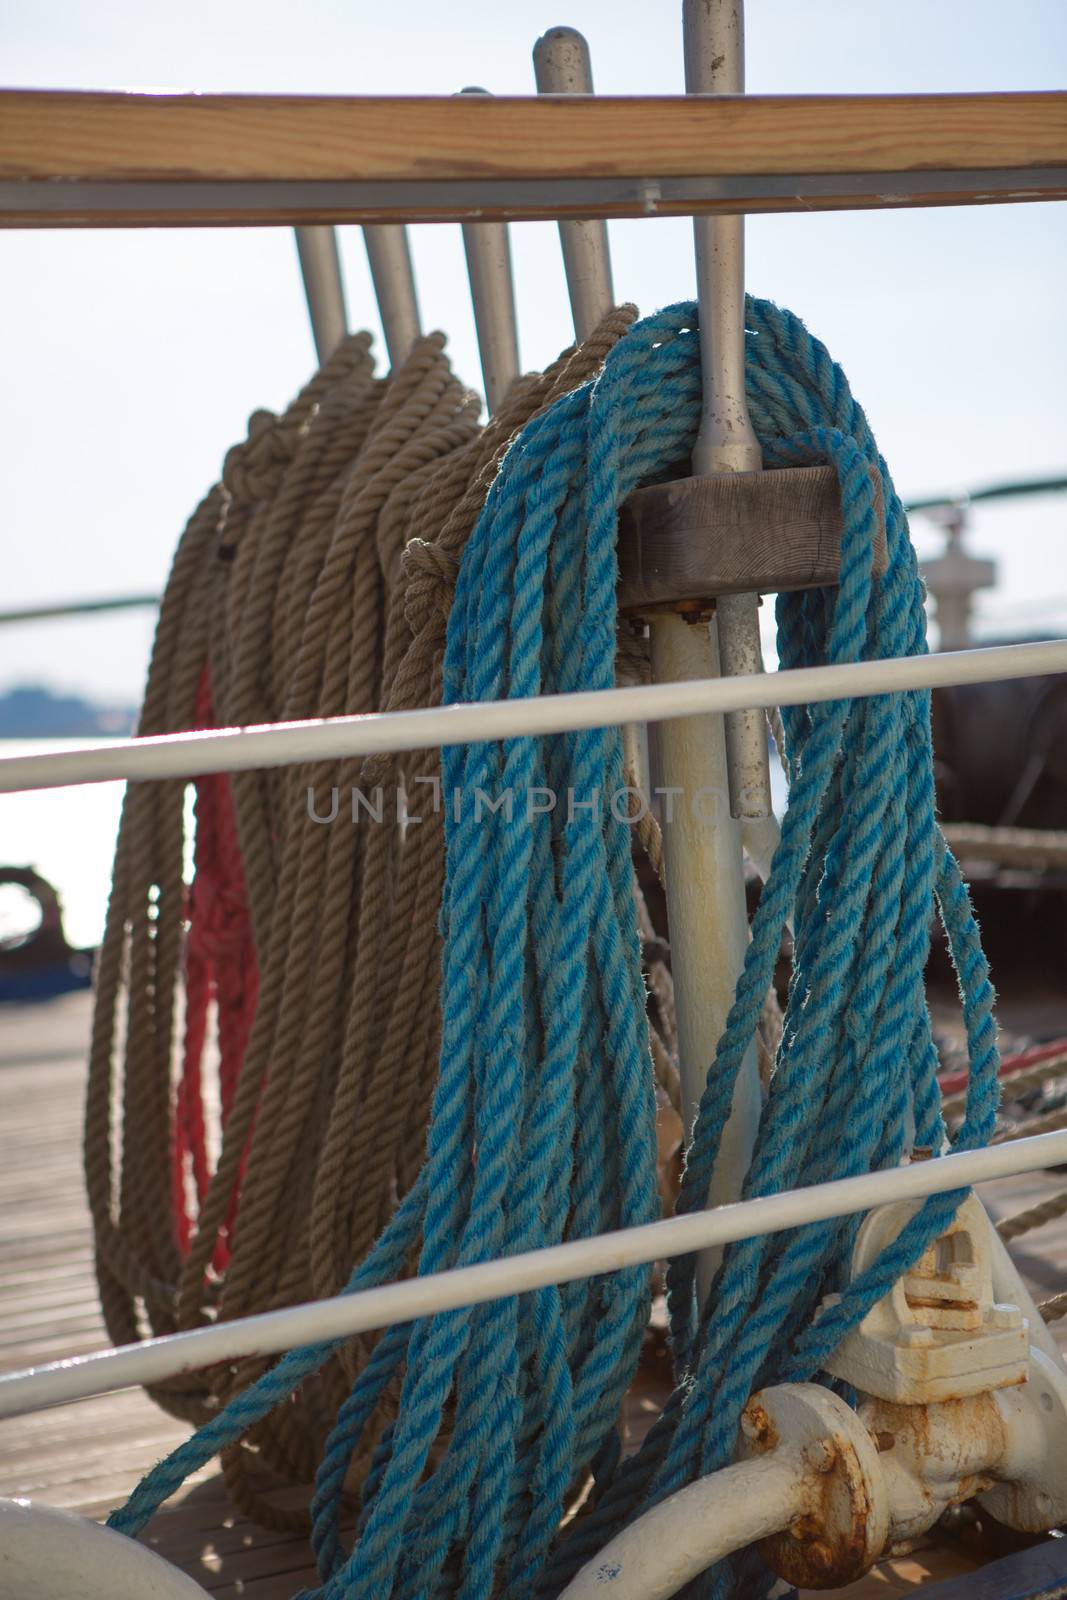 Ropes on a ship early in the morning in the harbor of Goteborg in Sweden